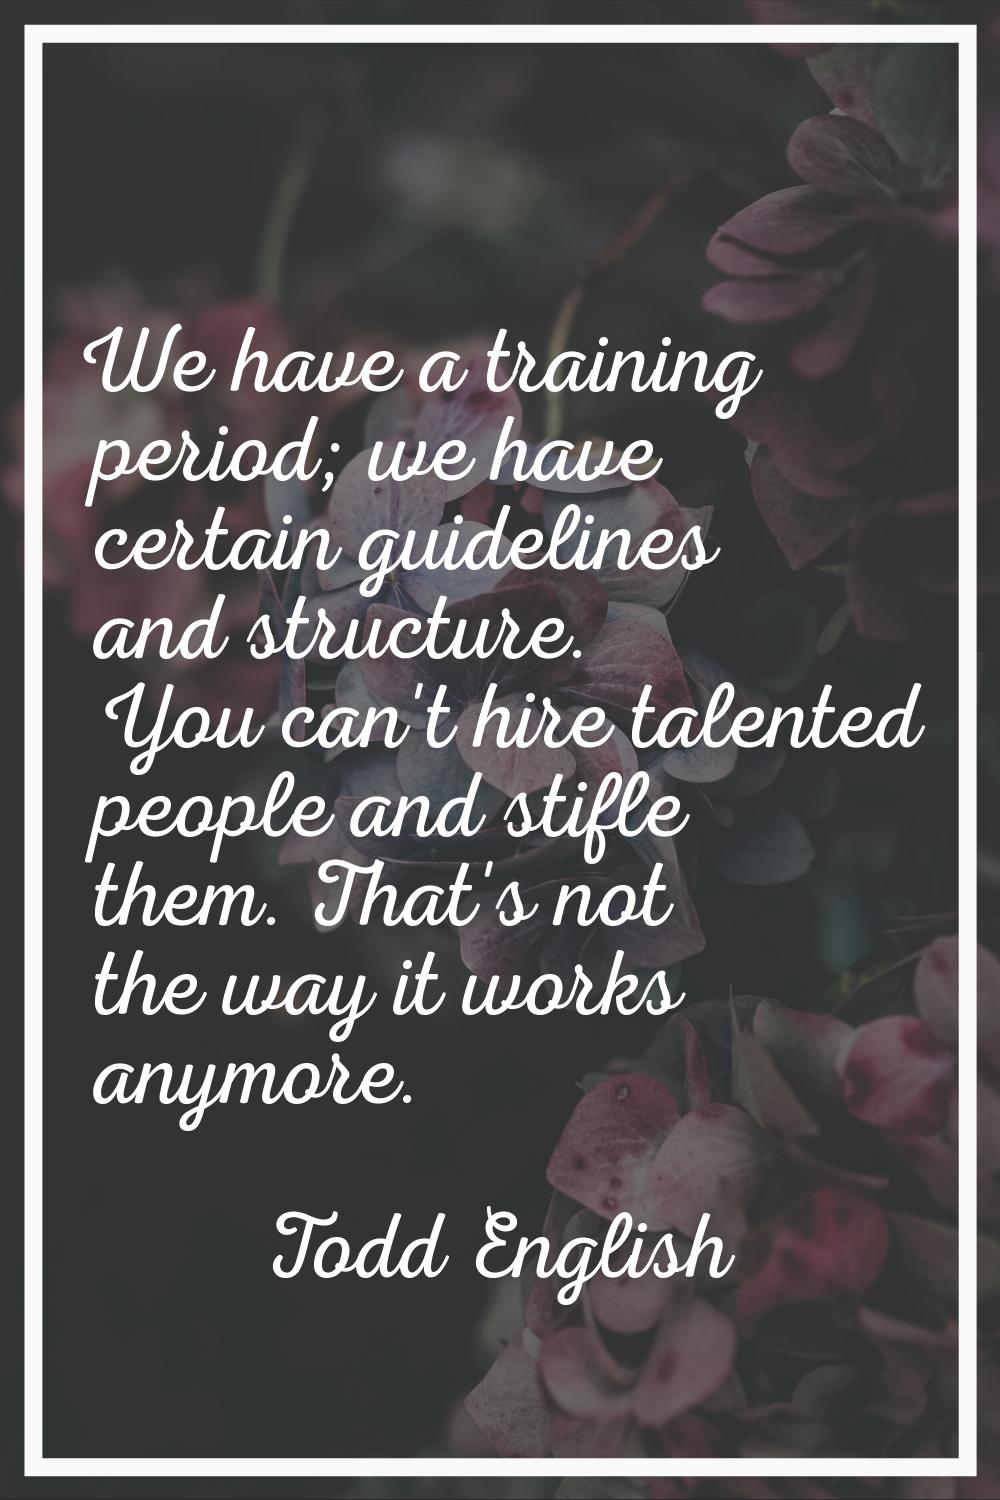 We have a training period; we have certain guidelines and structure. You can't hire talented people